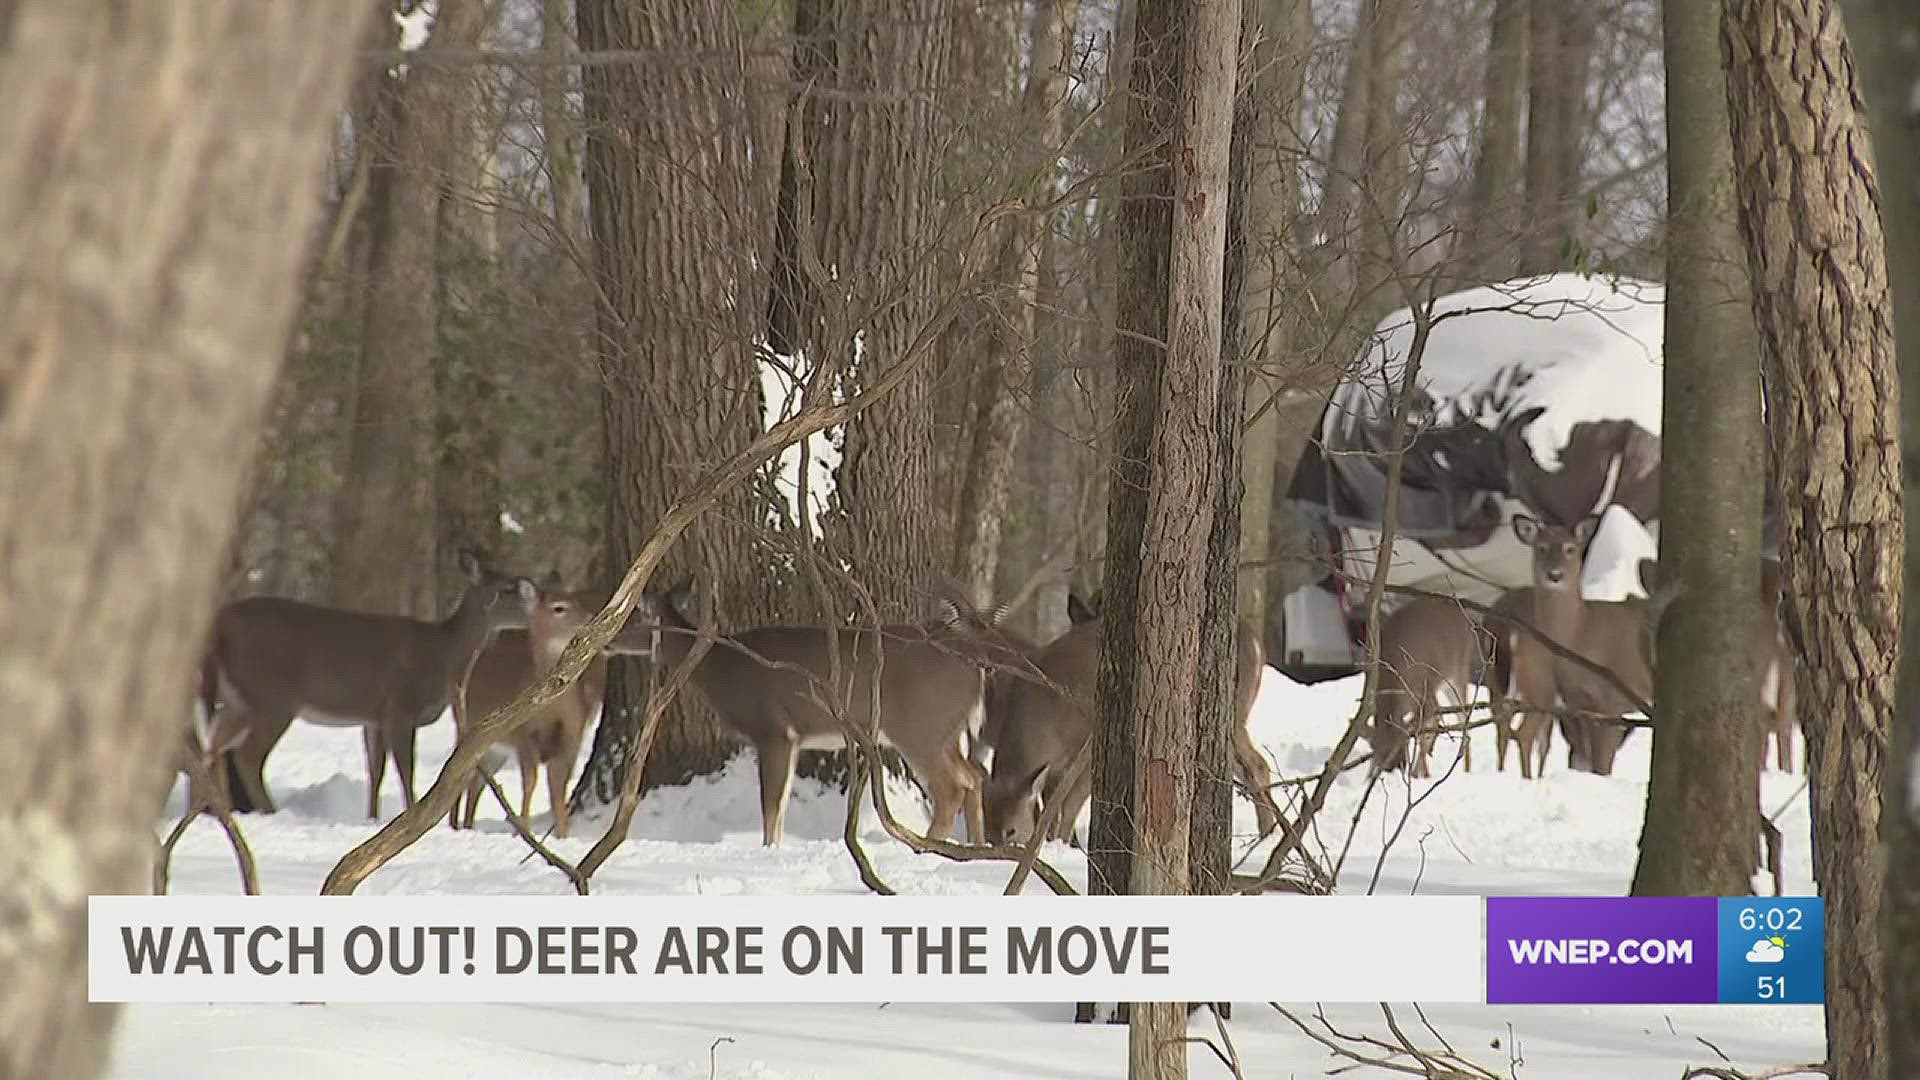 They come out of nowhere and can do a mess of damage to your vehicle. We are in mating season for whitetail deer and they are everywhere, especially in the Poconos.